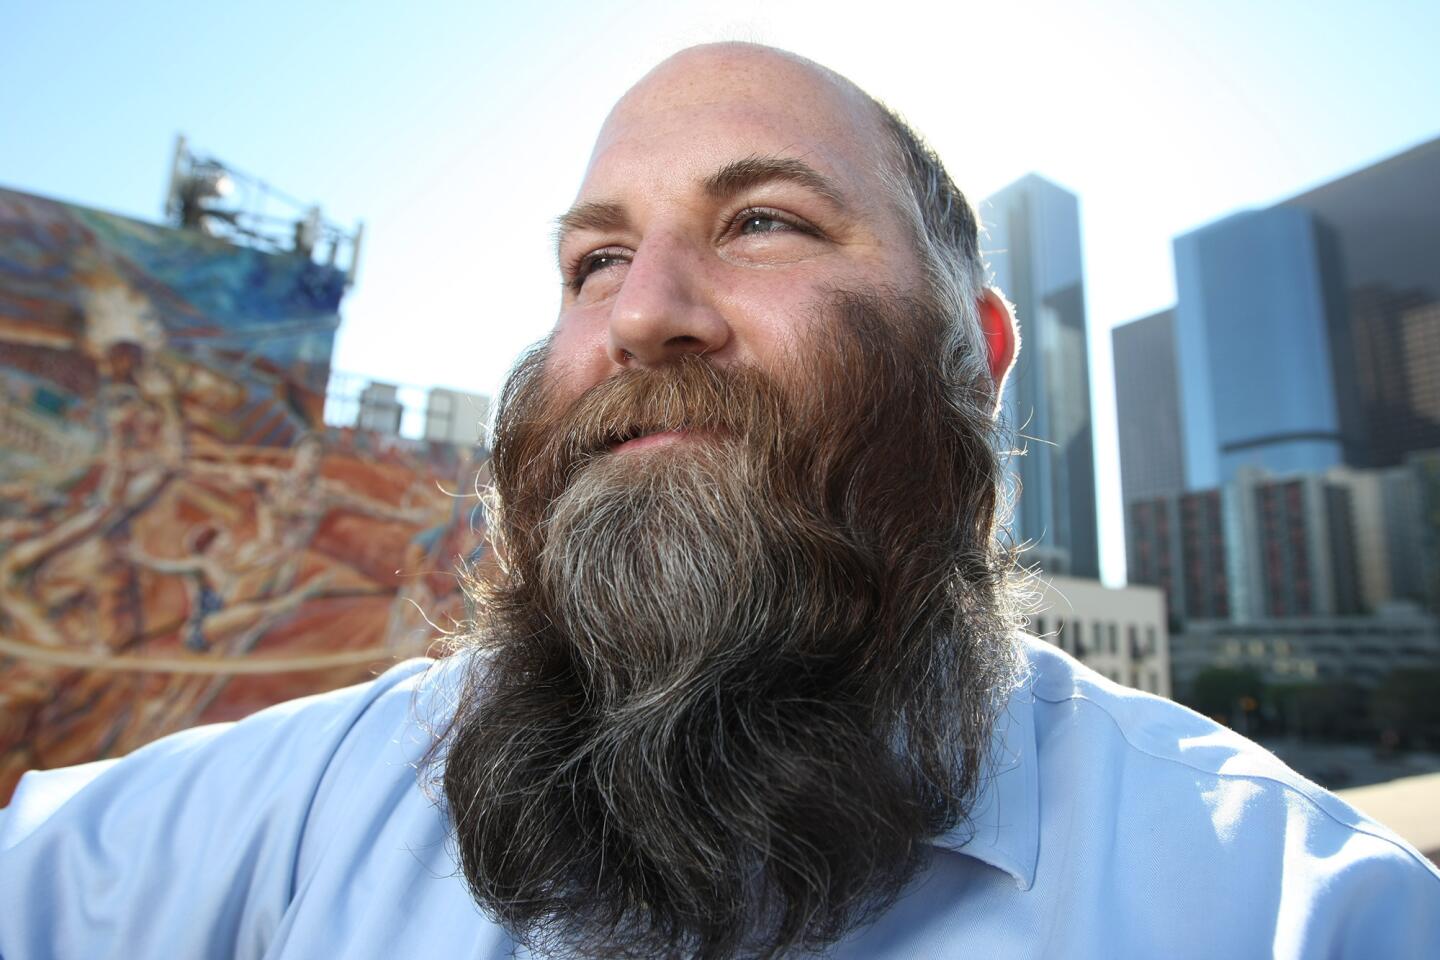 Photo Galley: Reporter in beard competition